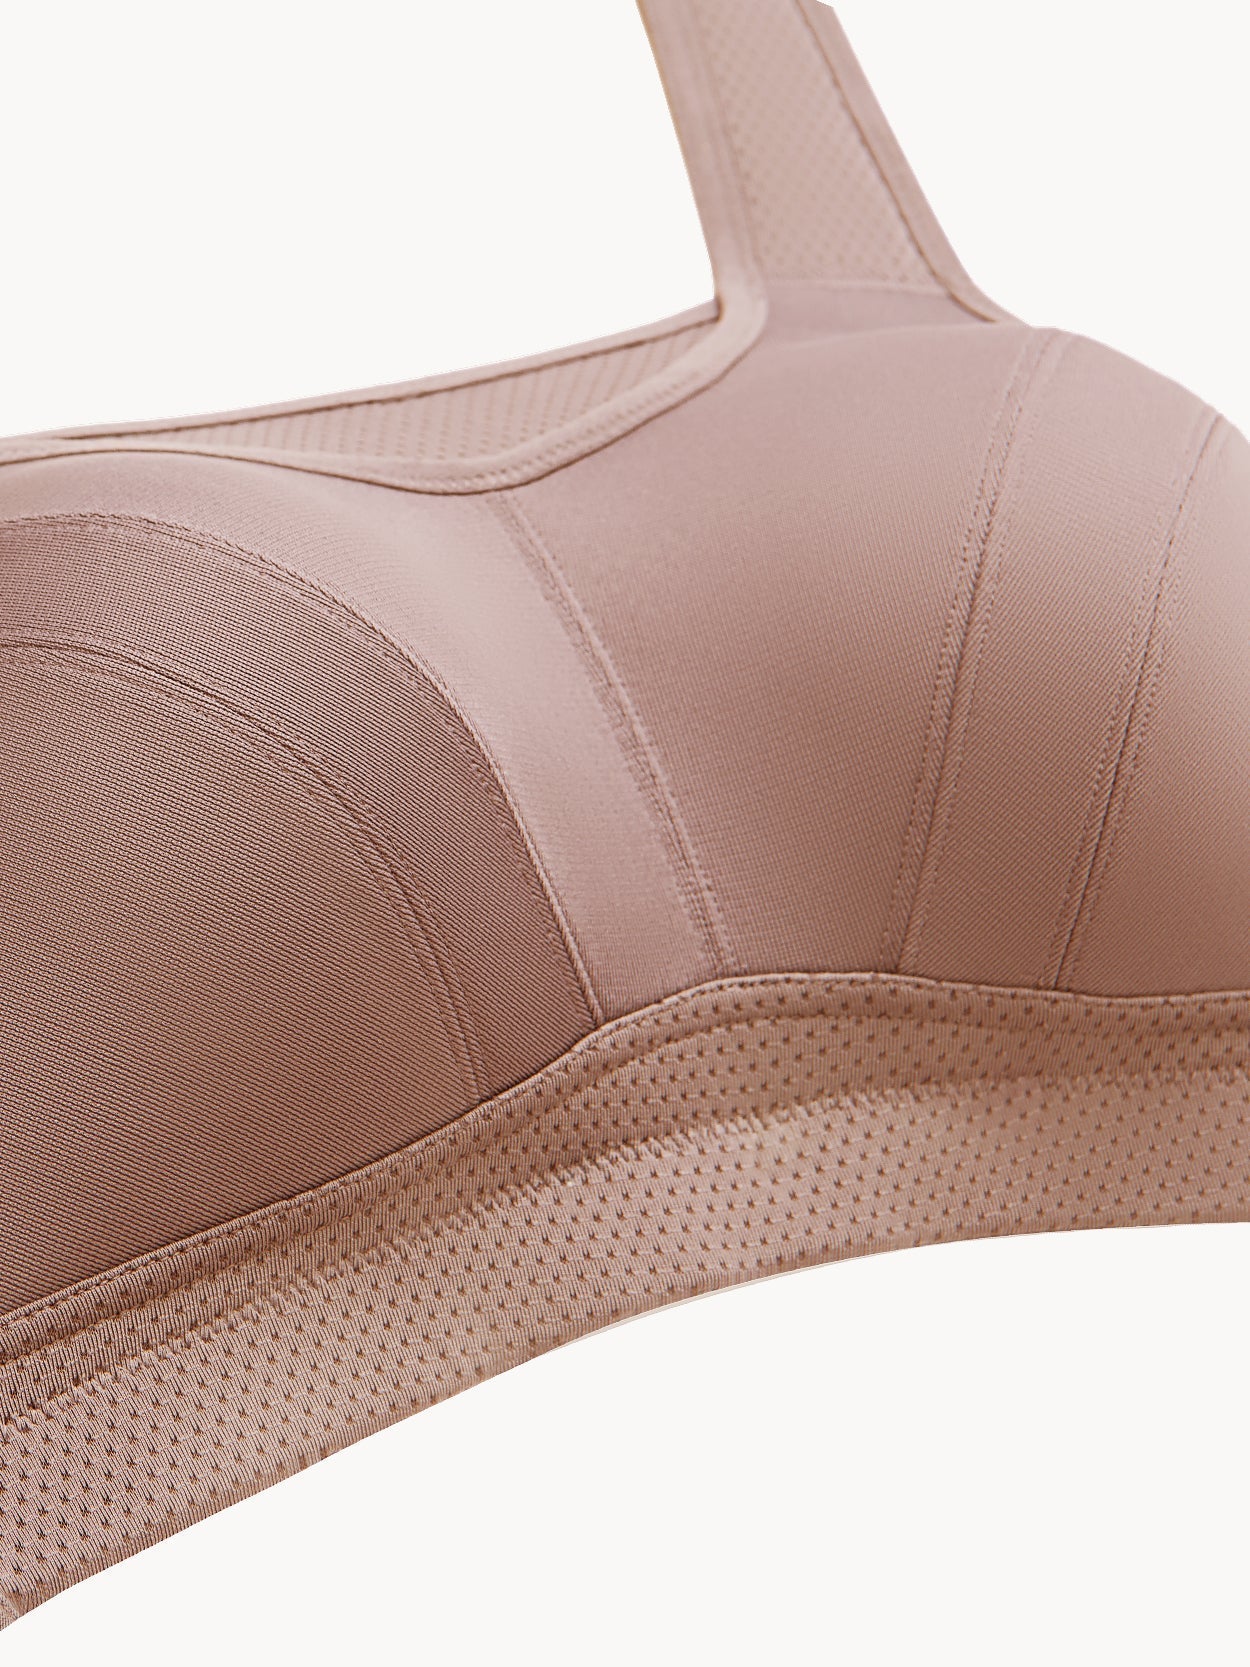 Copper Infused Sports Bra - Spectral Body - Copper Fabric Activewear